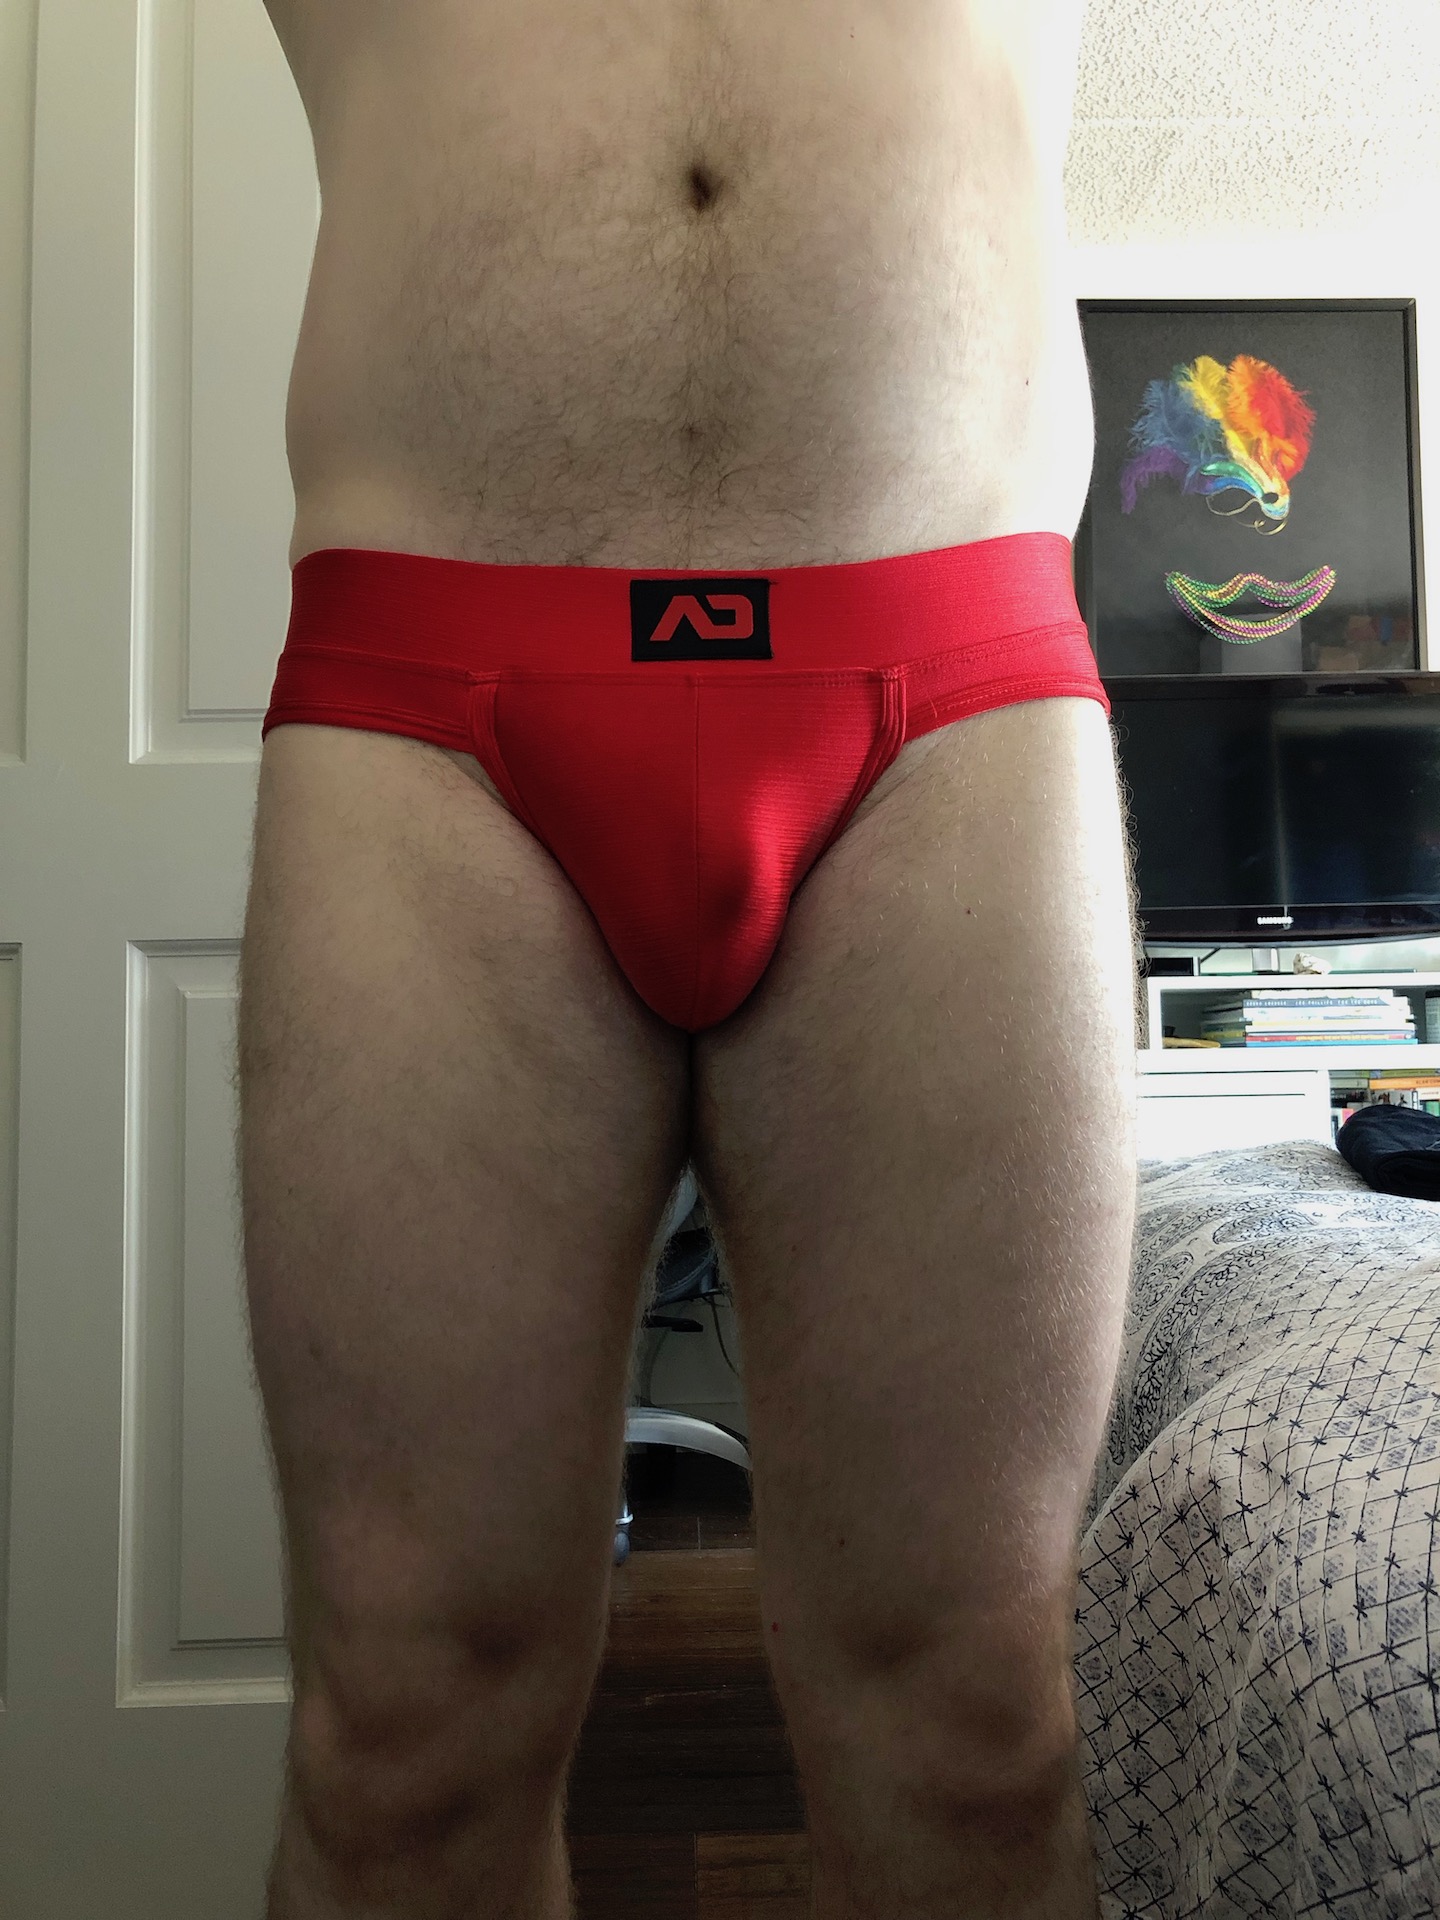 AD by Addicted bright red briefs…